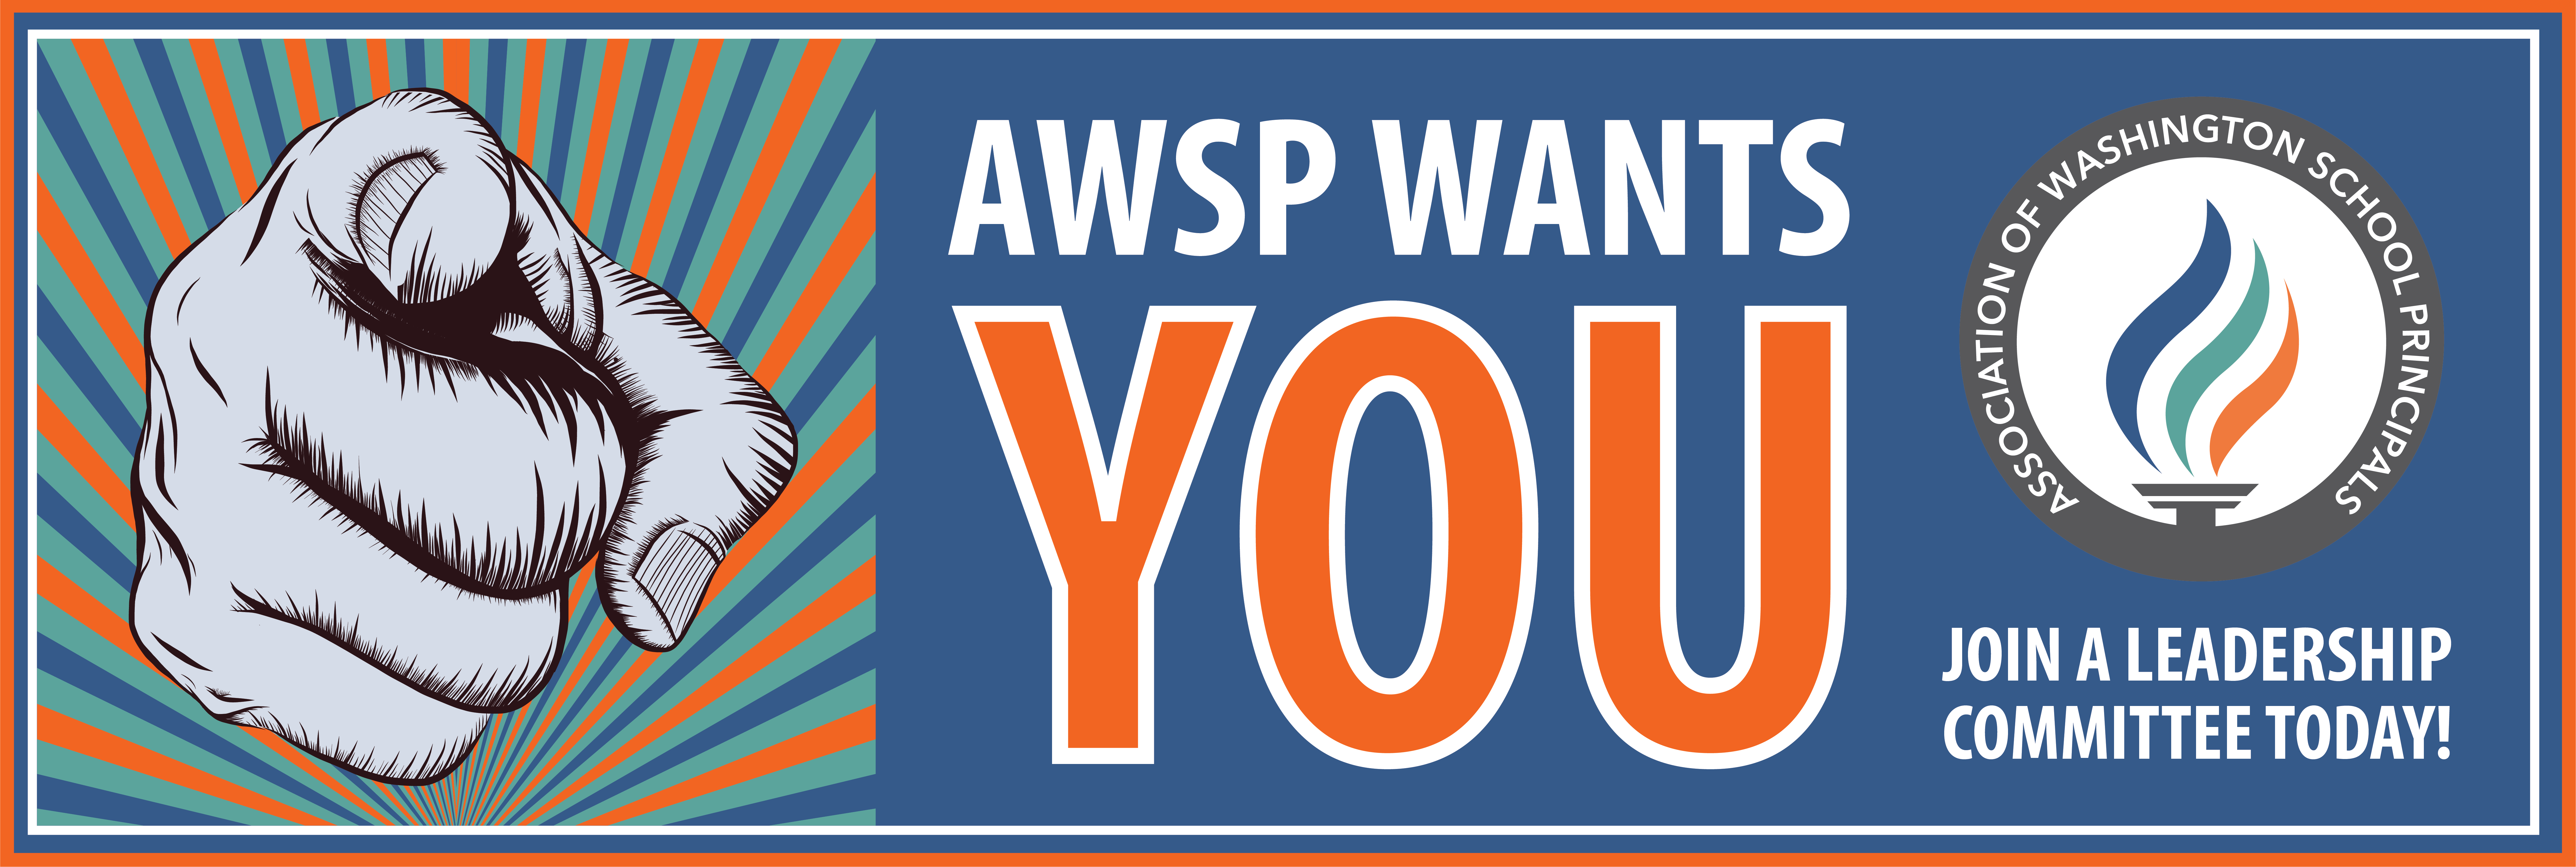 AWSP Wants YOU: Join a Leadership Committee Today!